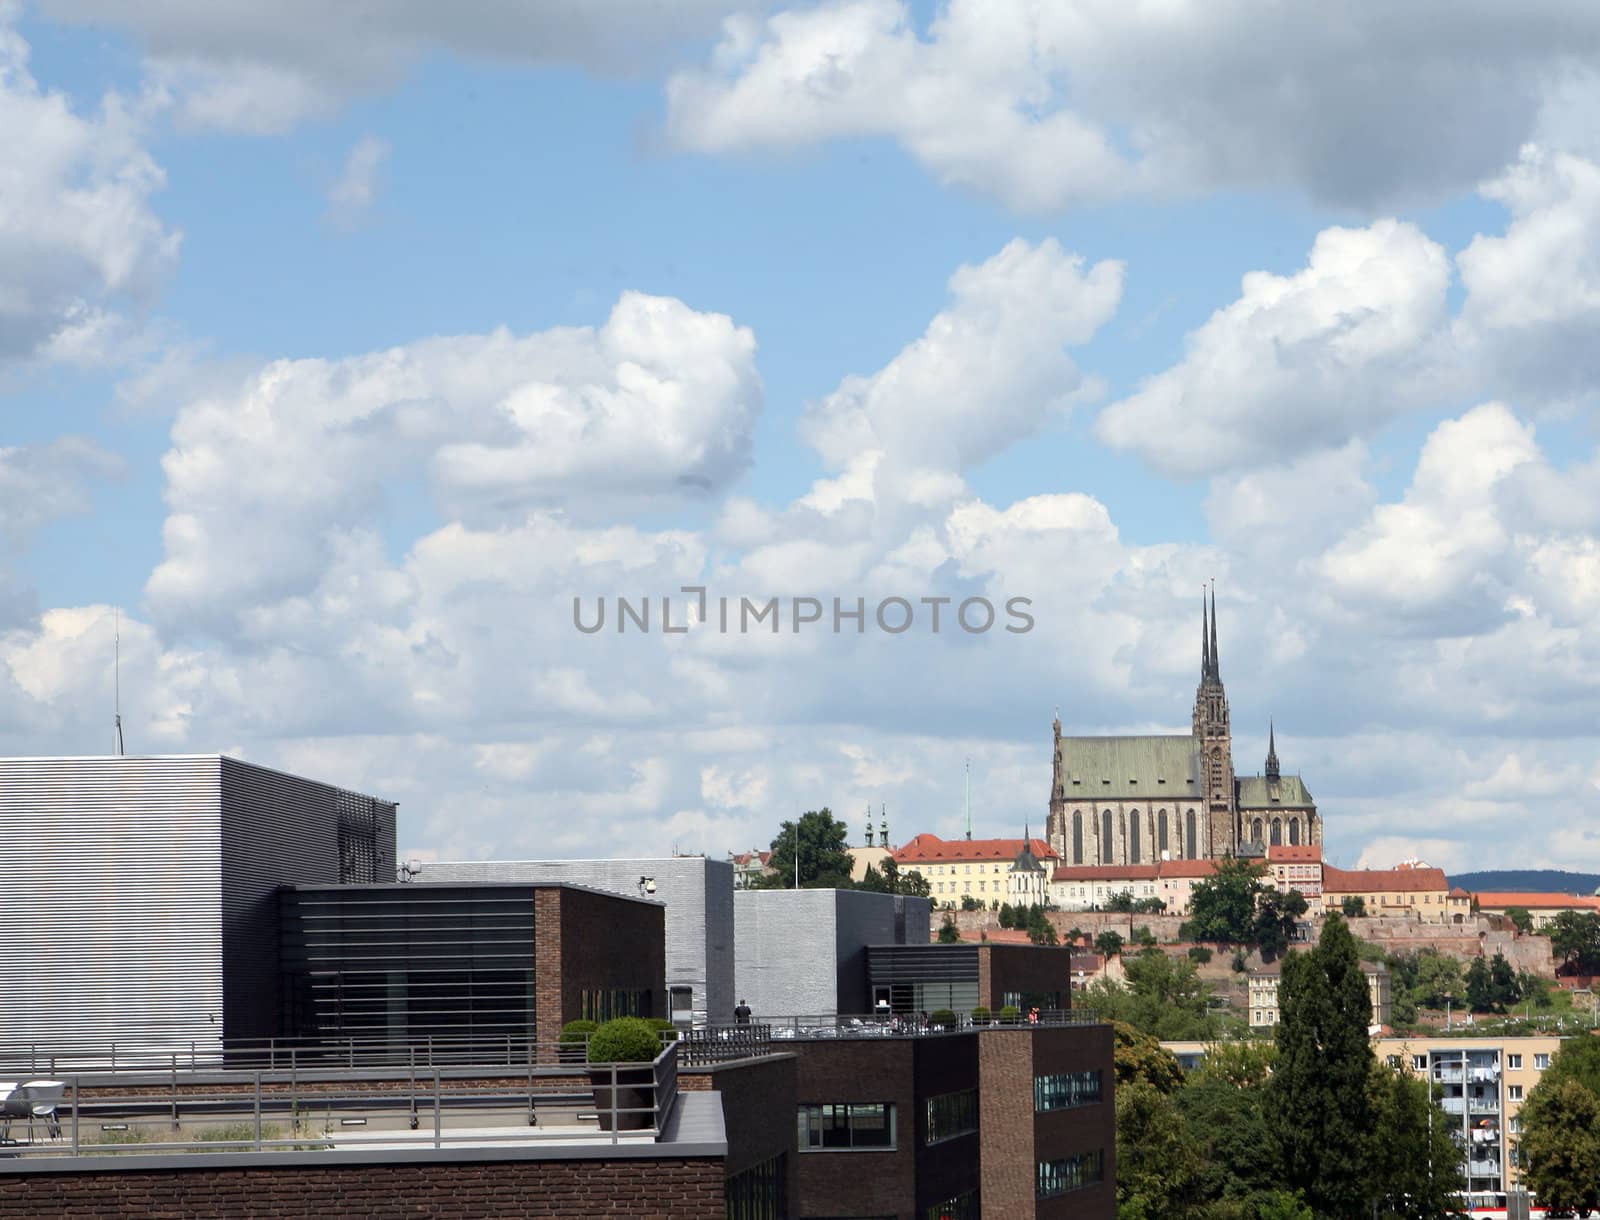 View of ghotic cathedral in Brno from one of office buildings around by haak78